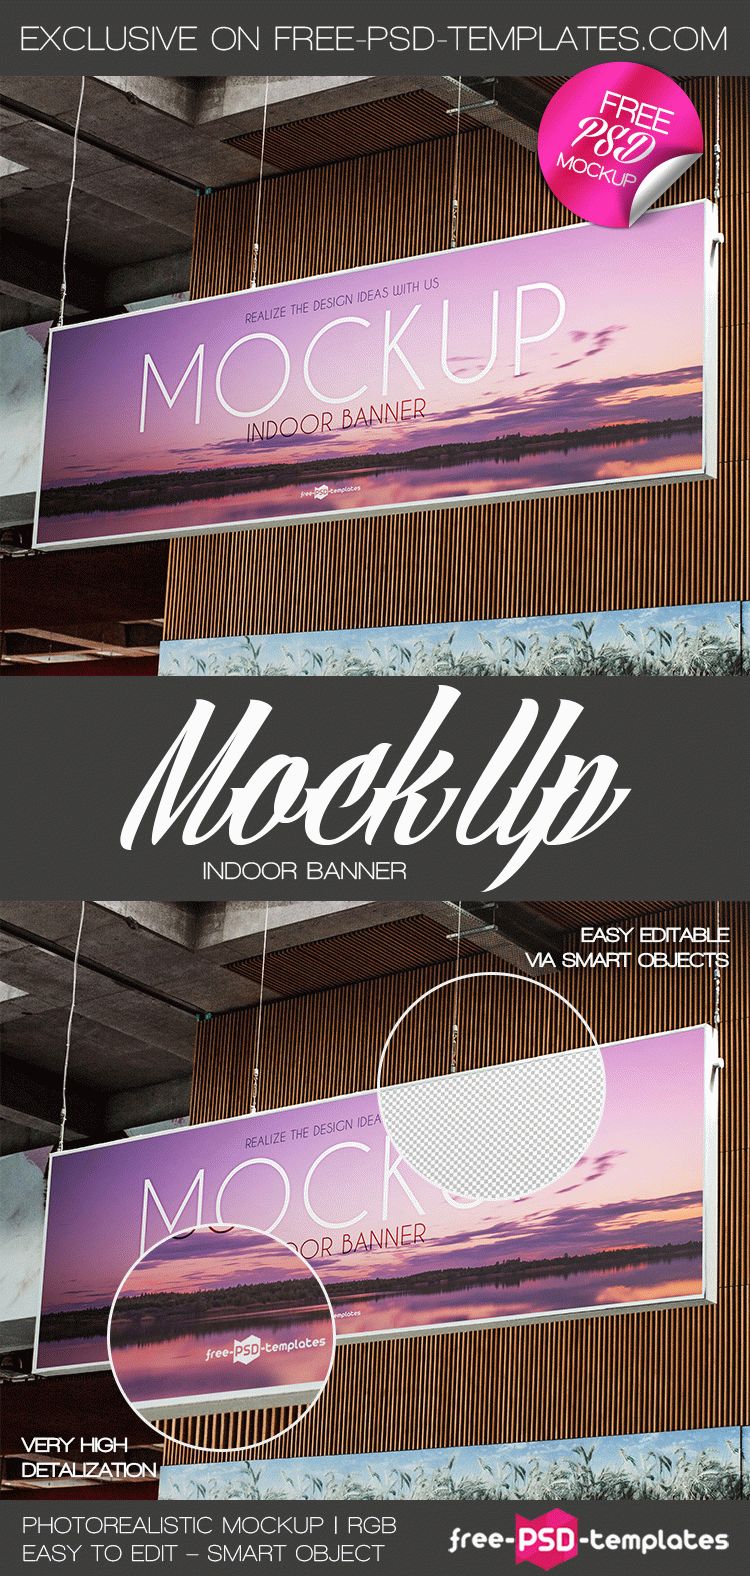 Download Free Indoor Banner Mock-up in PSD | Free PSD Templates